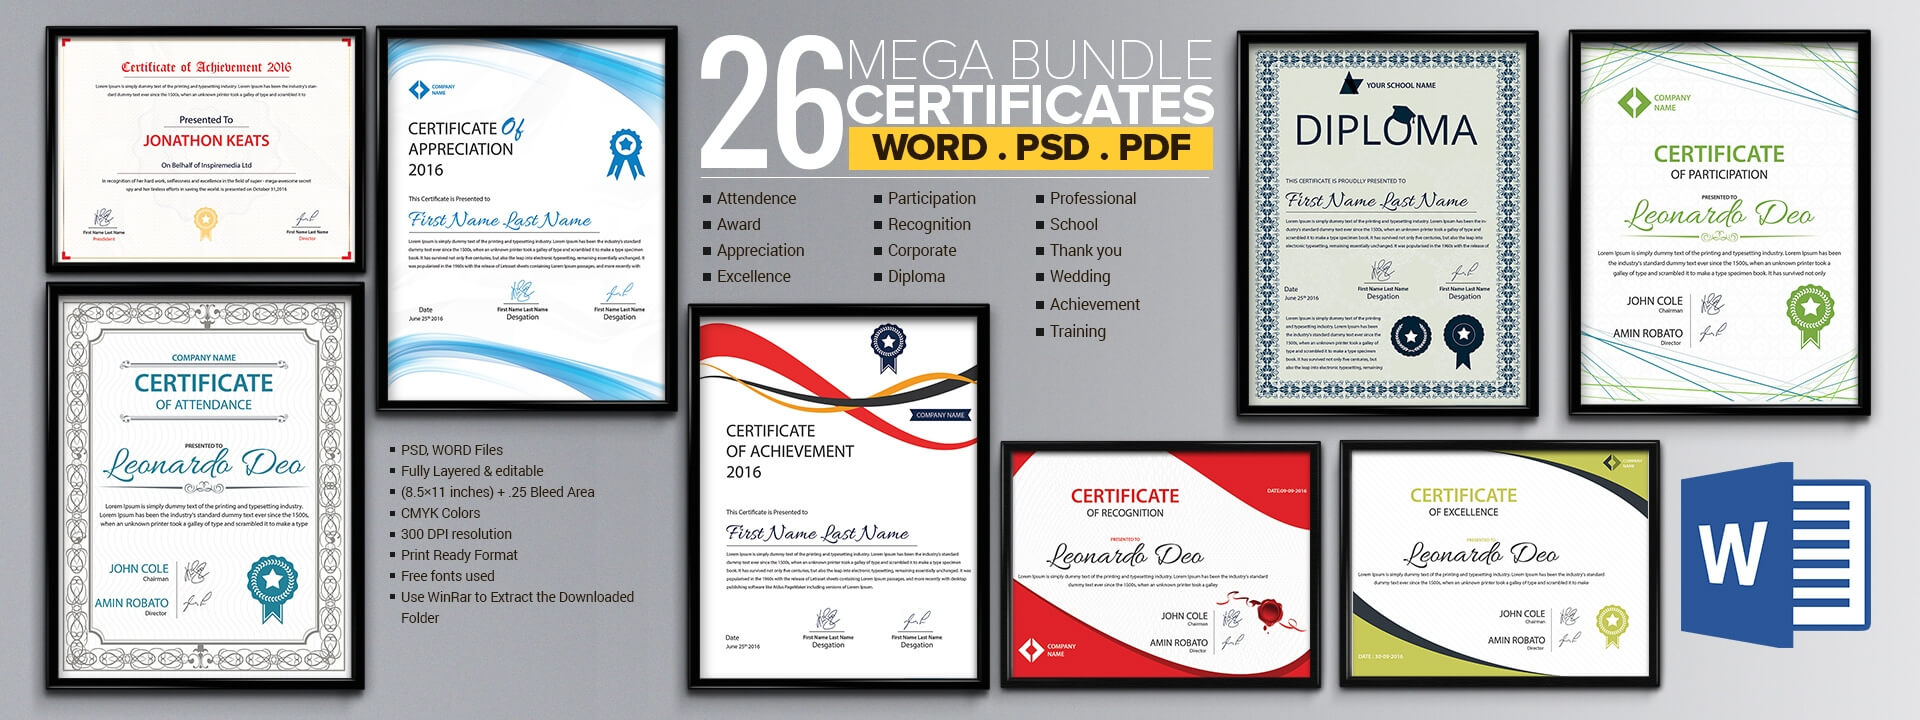 Word Certificate Template - 53+ Free Download Samples Throughout Award Certificate Templates Word 2007